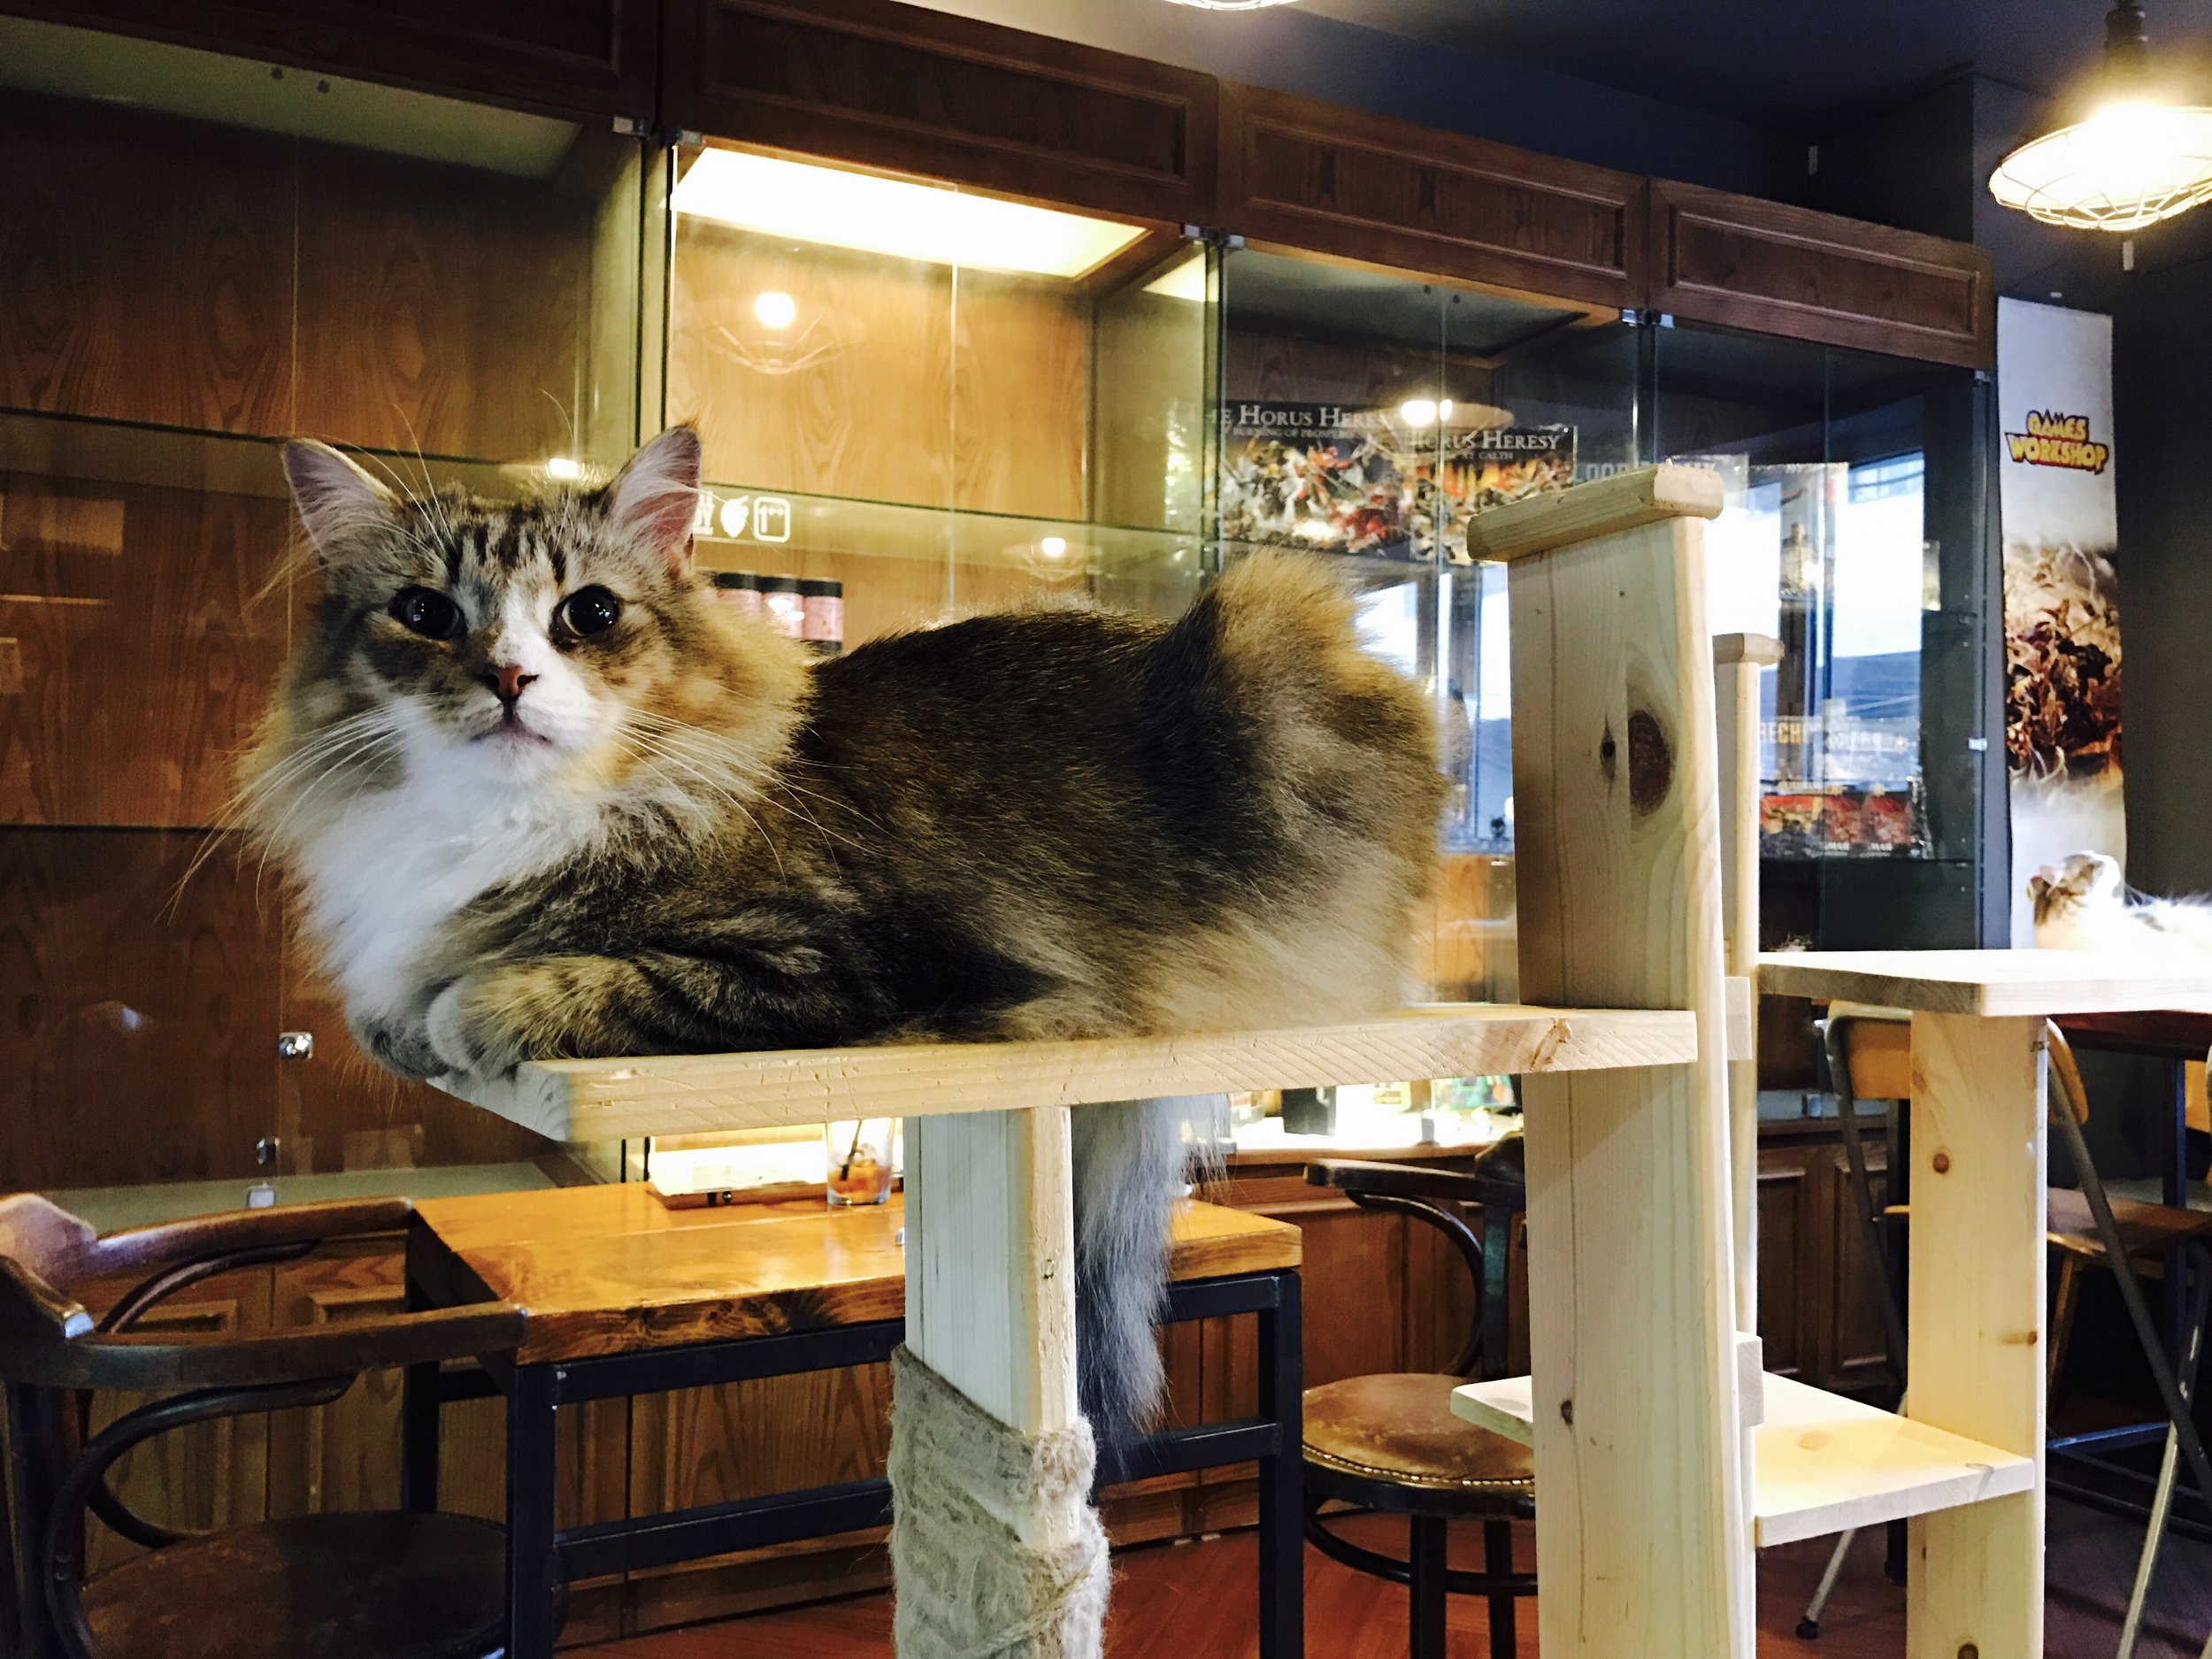 The Four Best Cat Cafes in Kyoto — The Neighbor's Cat